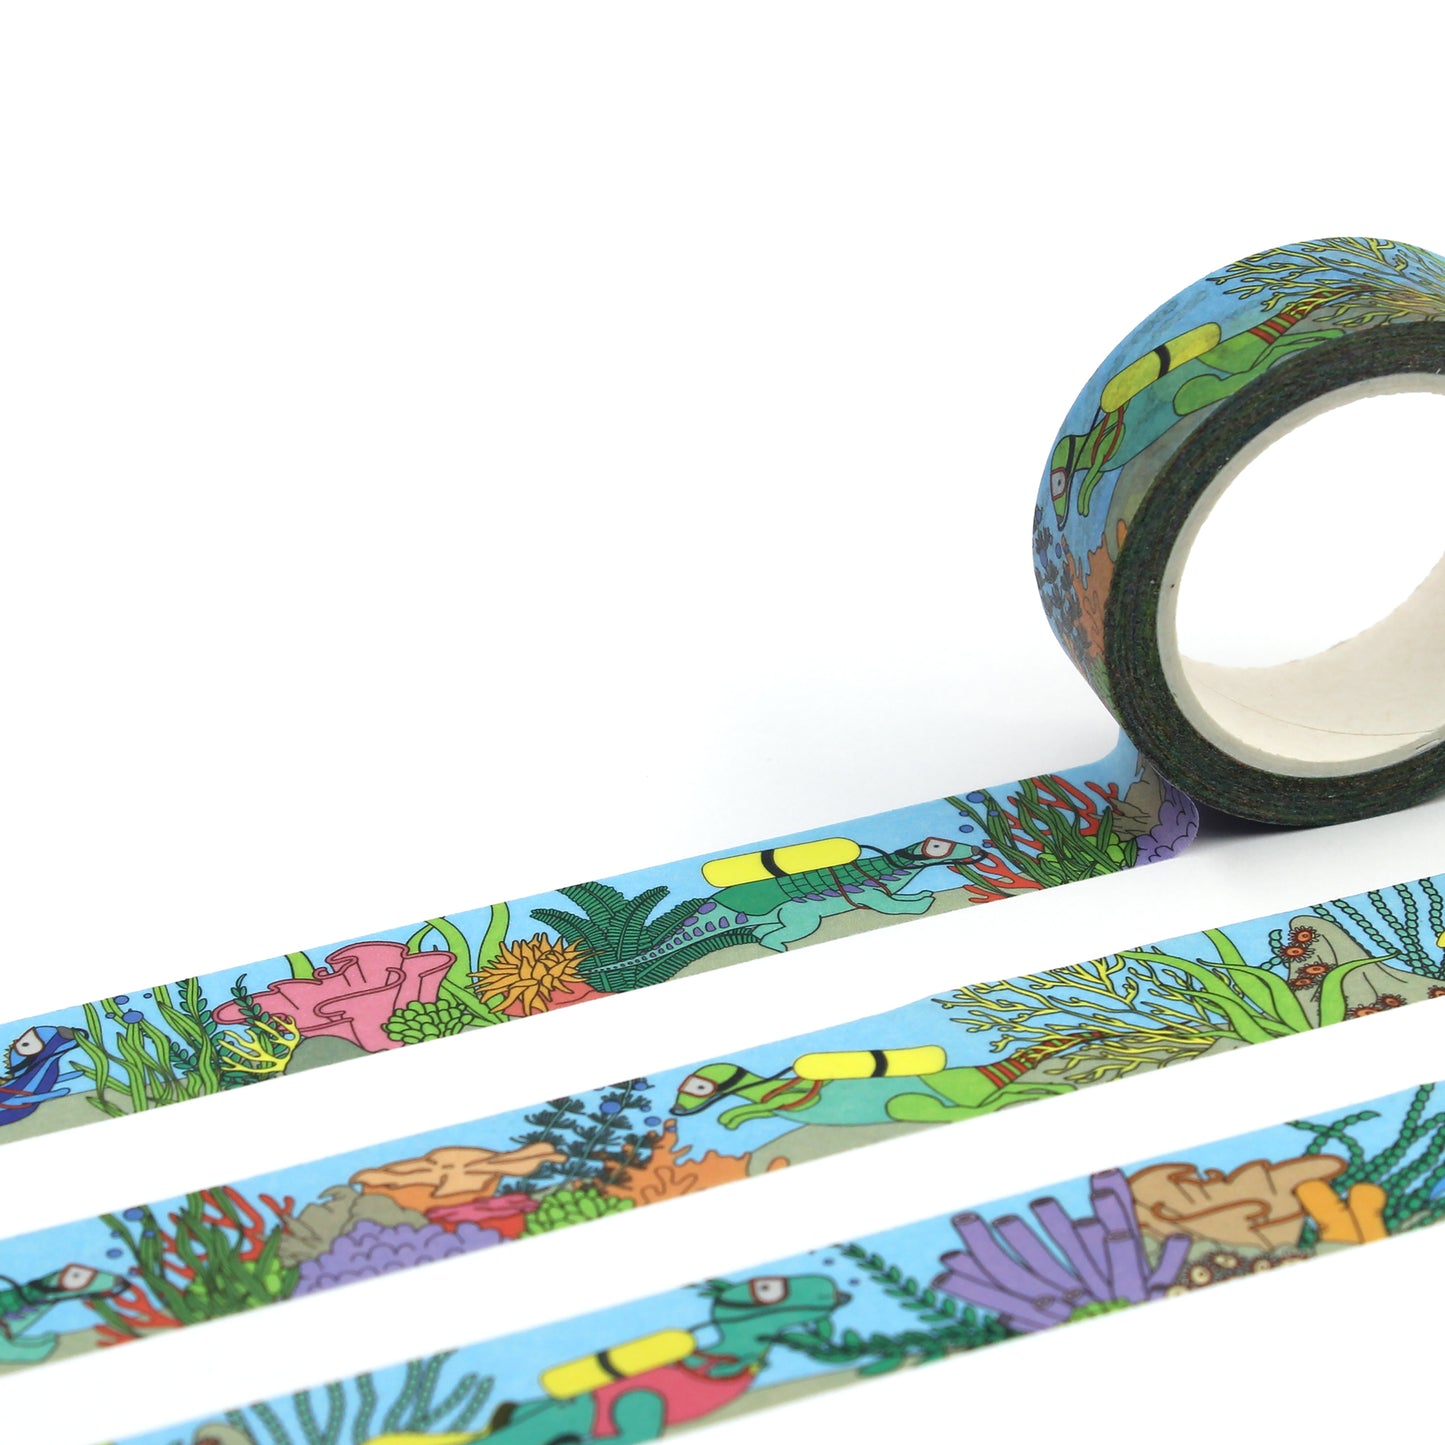 A roll of under the sea dinosaur washi tape rolled out to reveal the whole design